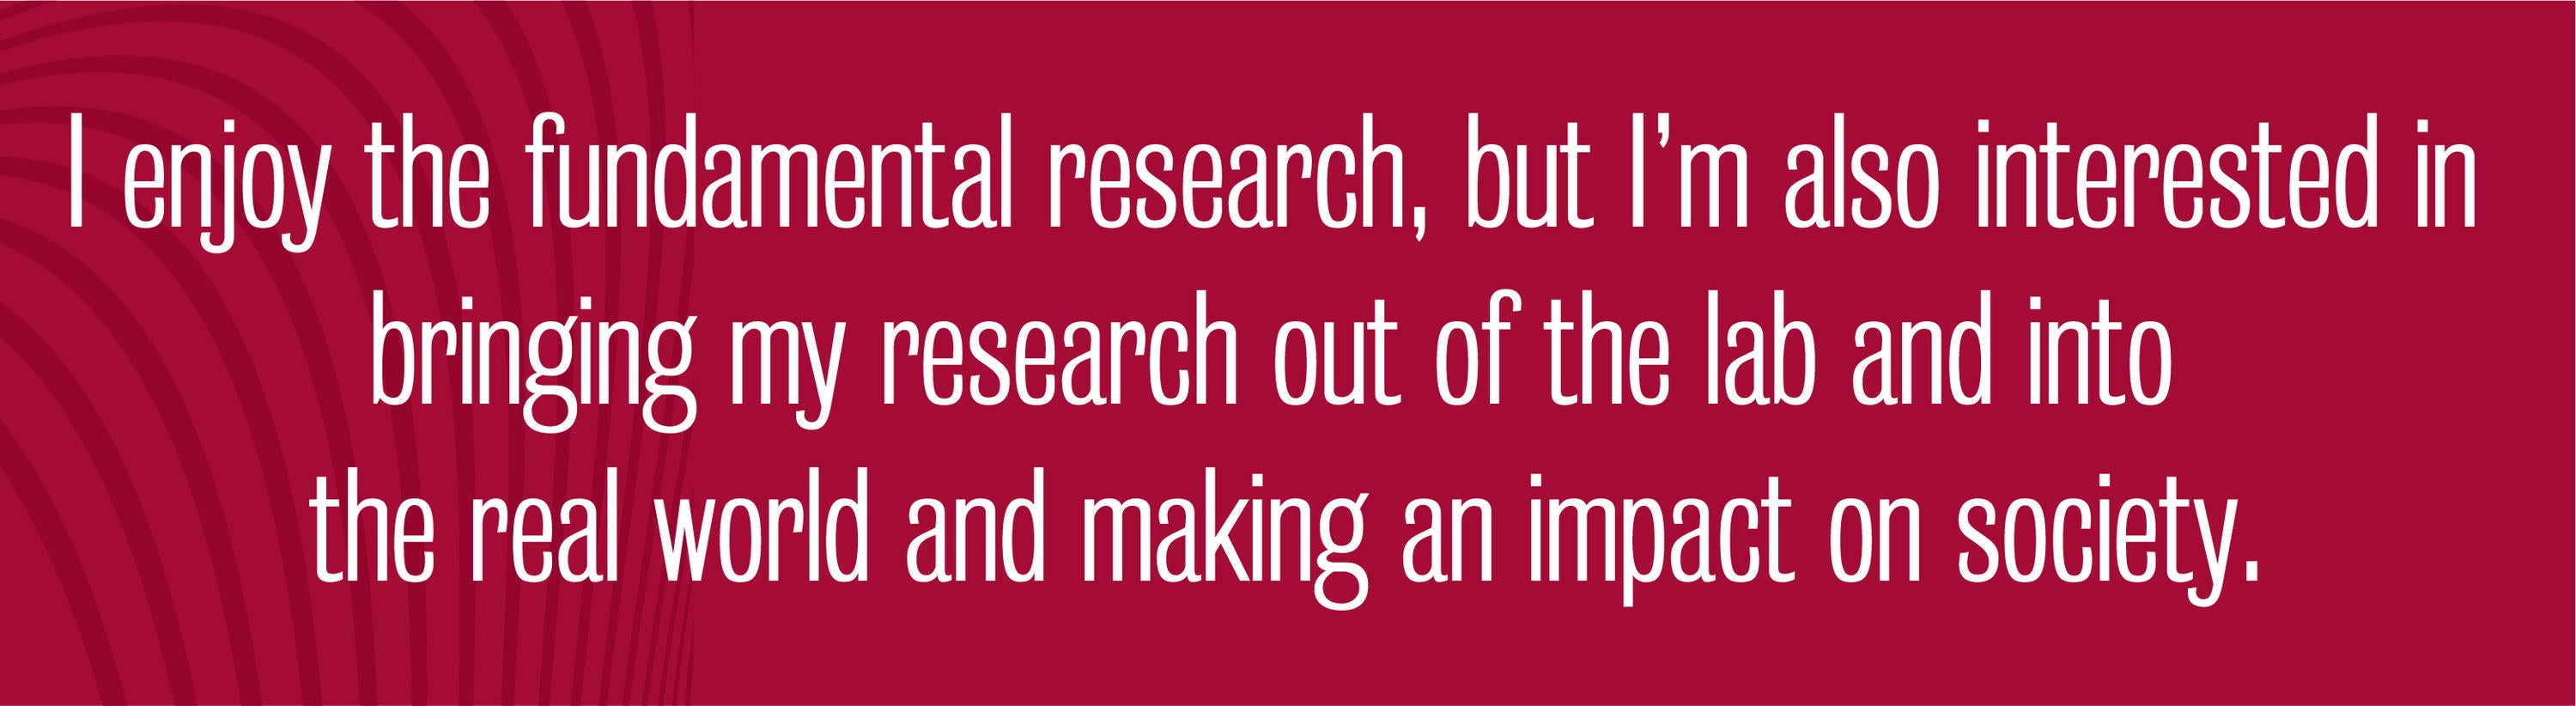 Quote - I enjoy the fundamental research, but I’m also interested in bringing my research out of the lab and into the real world and making an impact on society.